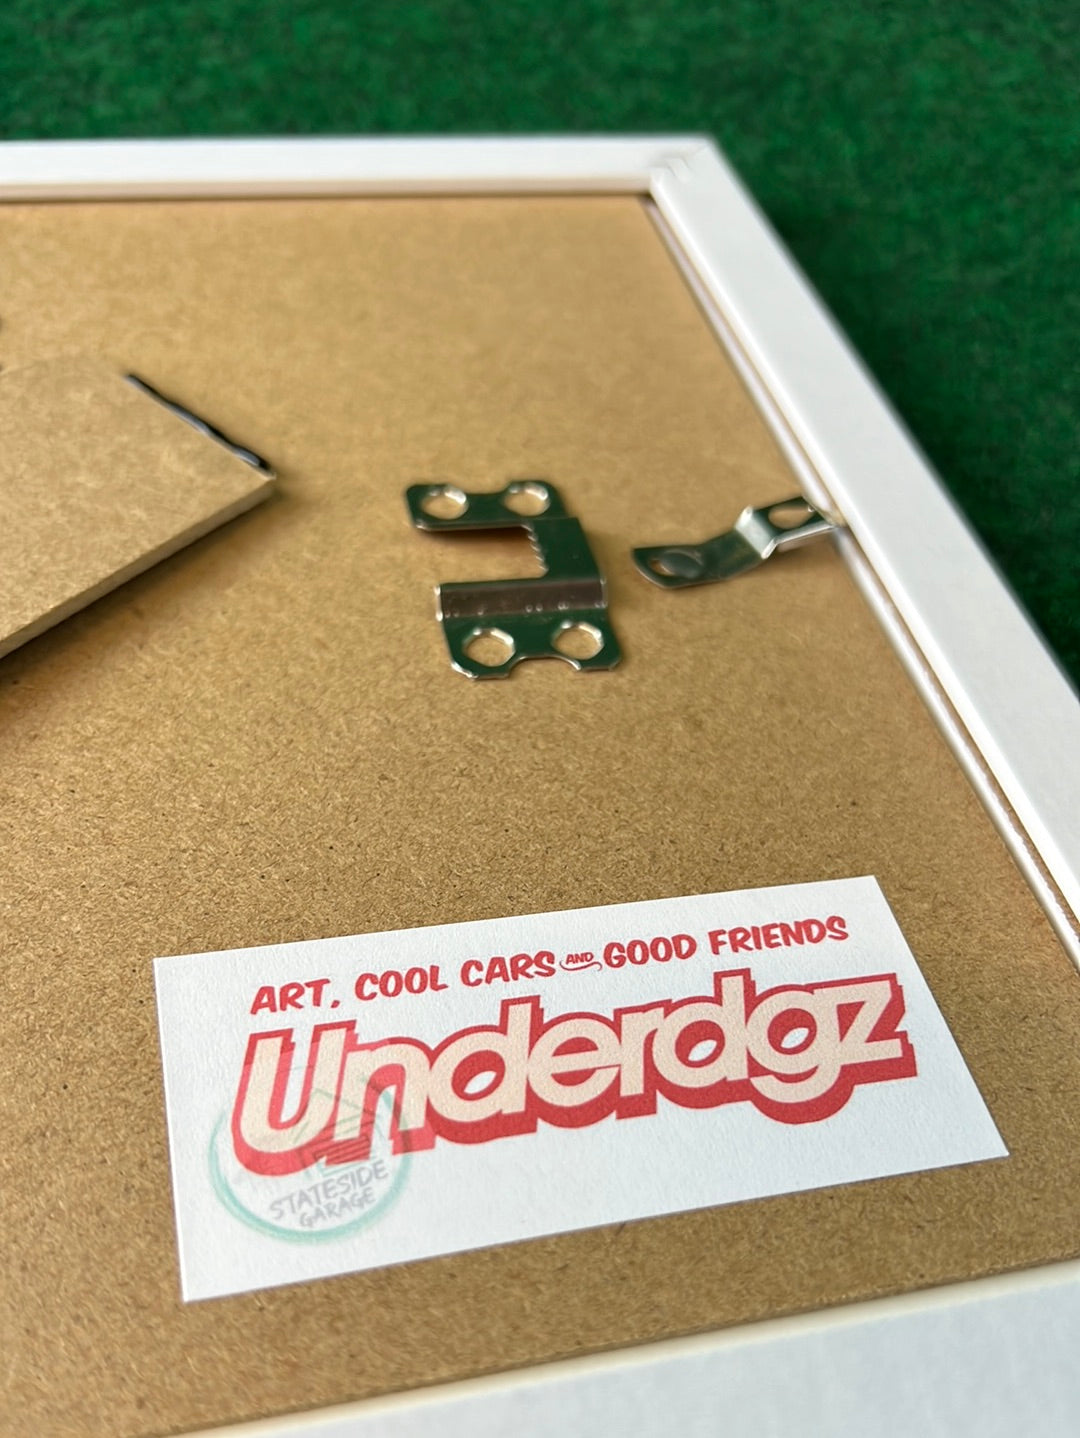 UNDERDOGZ - SPOON Sports NA2 Honda NSX (White Frame) Hand Drawn, Watercolor Painted & Signed Print